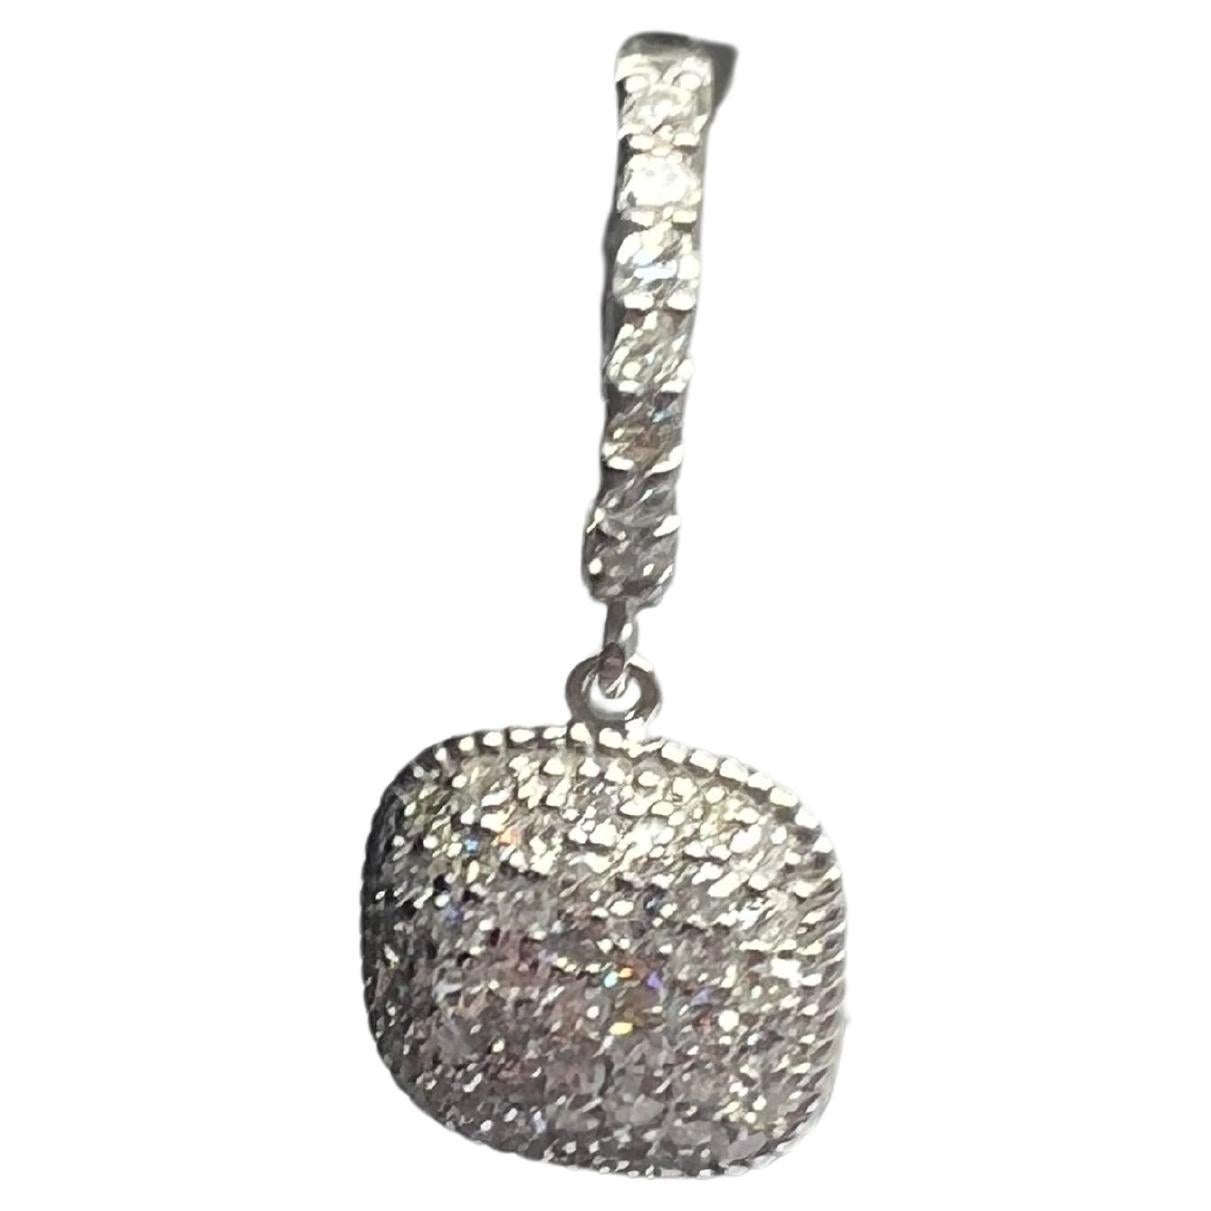 
Elevate your jewelry collection with these stunning 14k white gold diamond pave dangle drop huggy earrings. The round, natural diamonds are set in a pavé style and have a sparkling white color that perfectly complements the elegant design. The